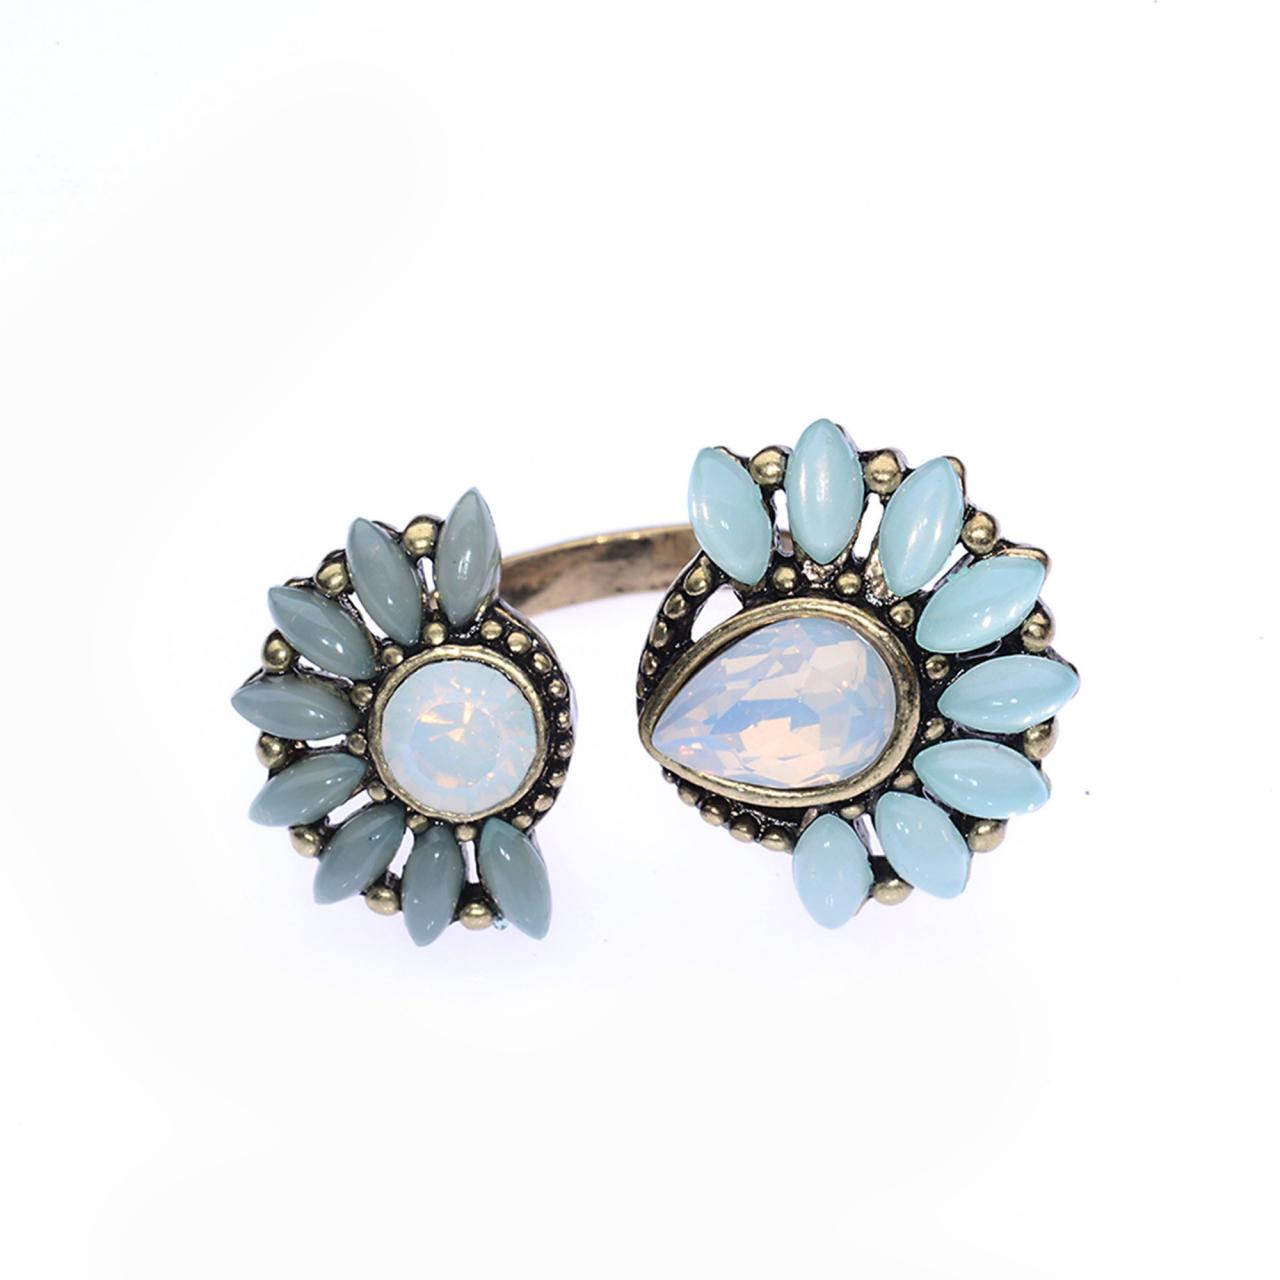 Flower Ring / Vintage Ring / Opal / Wrap Around Ring / Adjustable Ring / Open Ring / Costume Jewelry / Colorful Jewelry / Rustic Ring / Blue